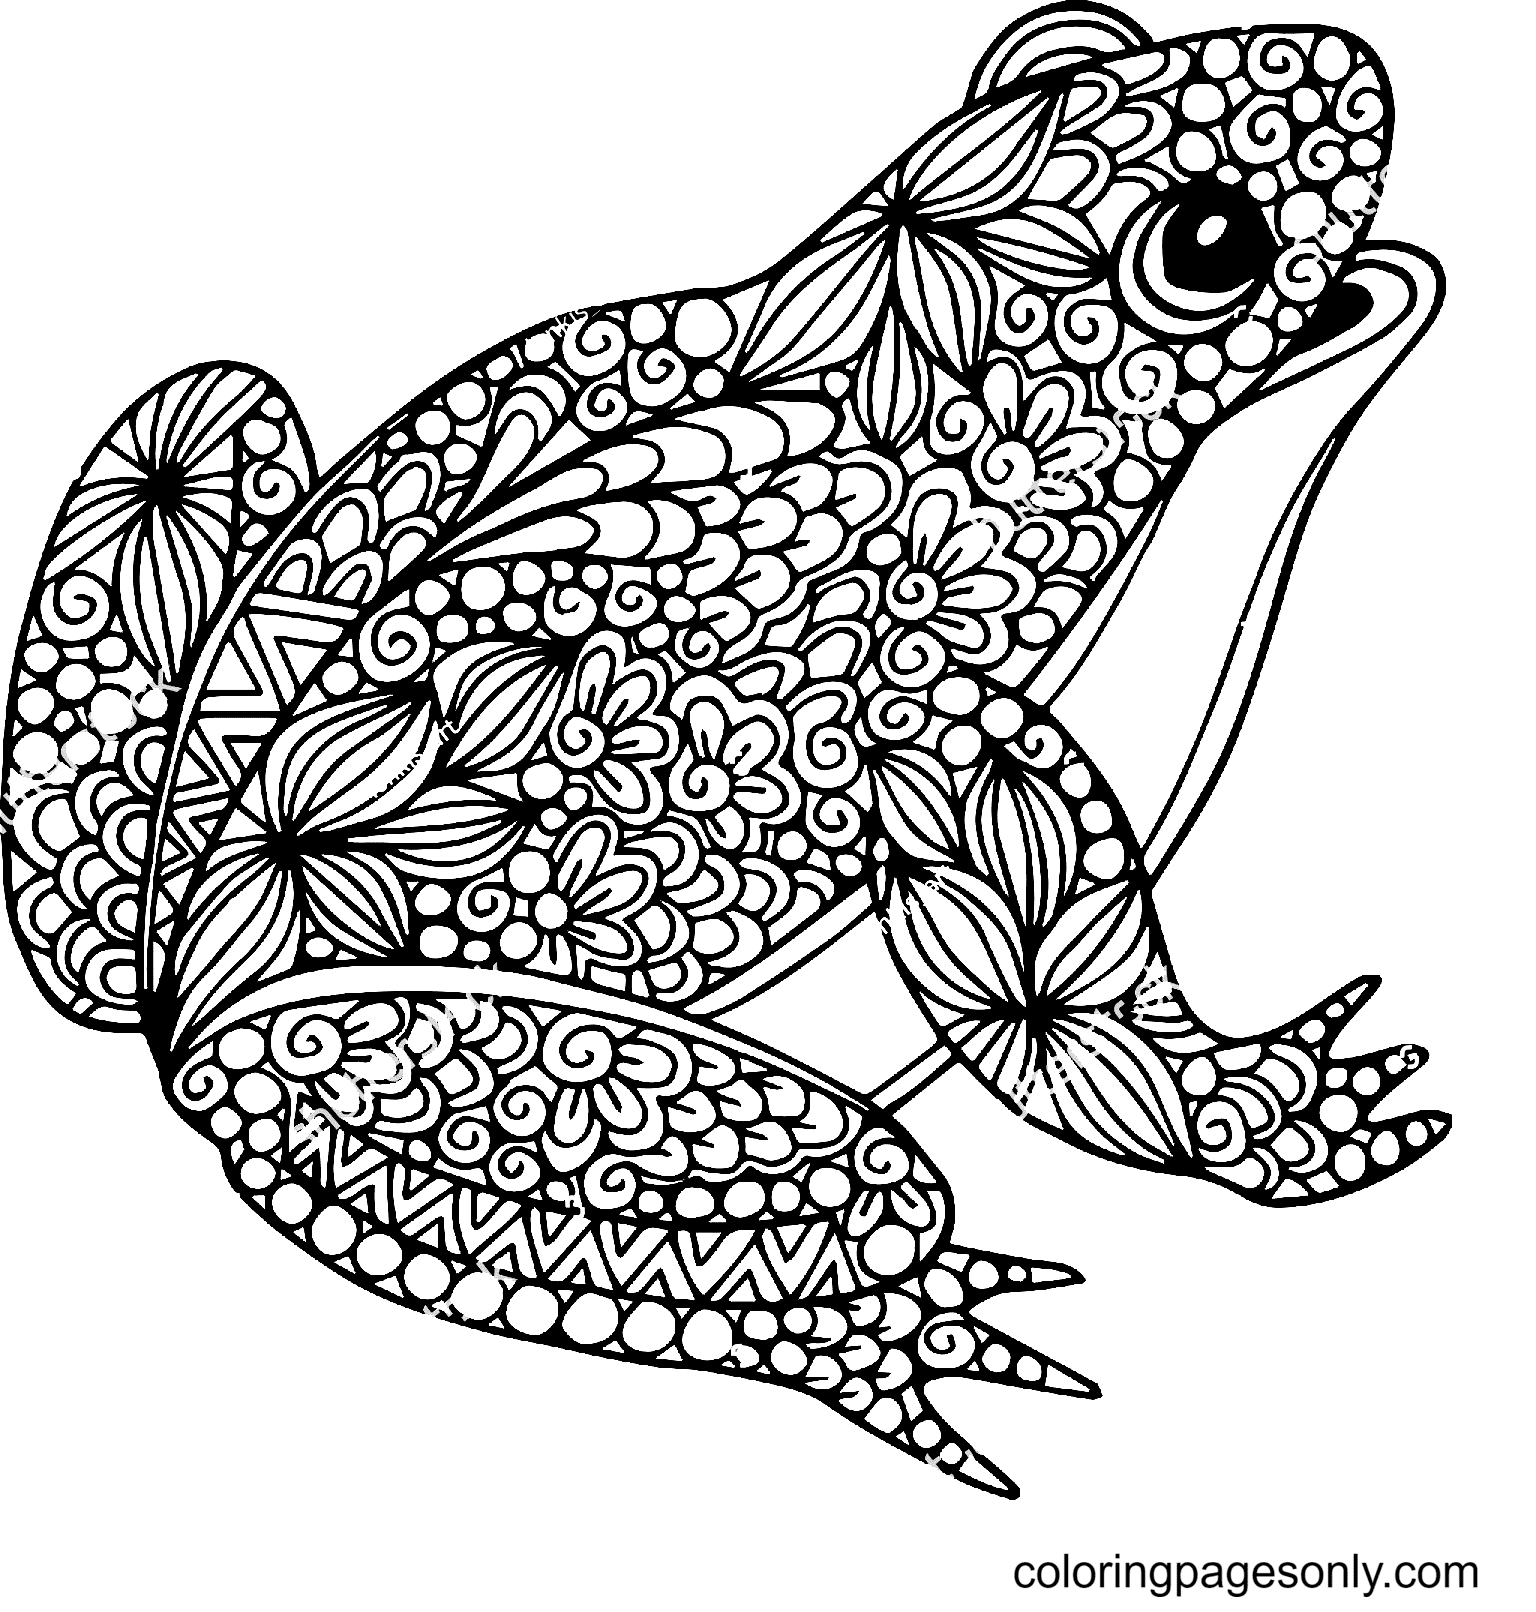 Happy Laughing Frog Coloring Pages